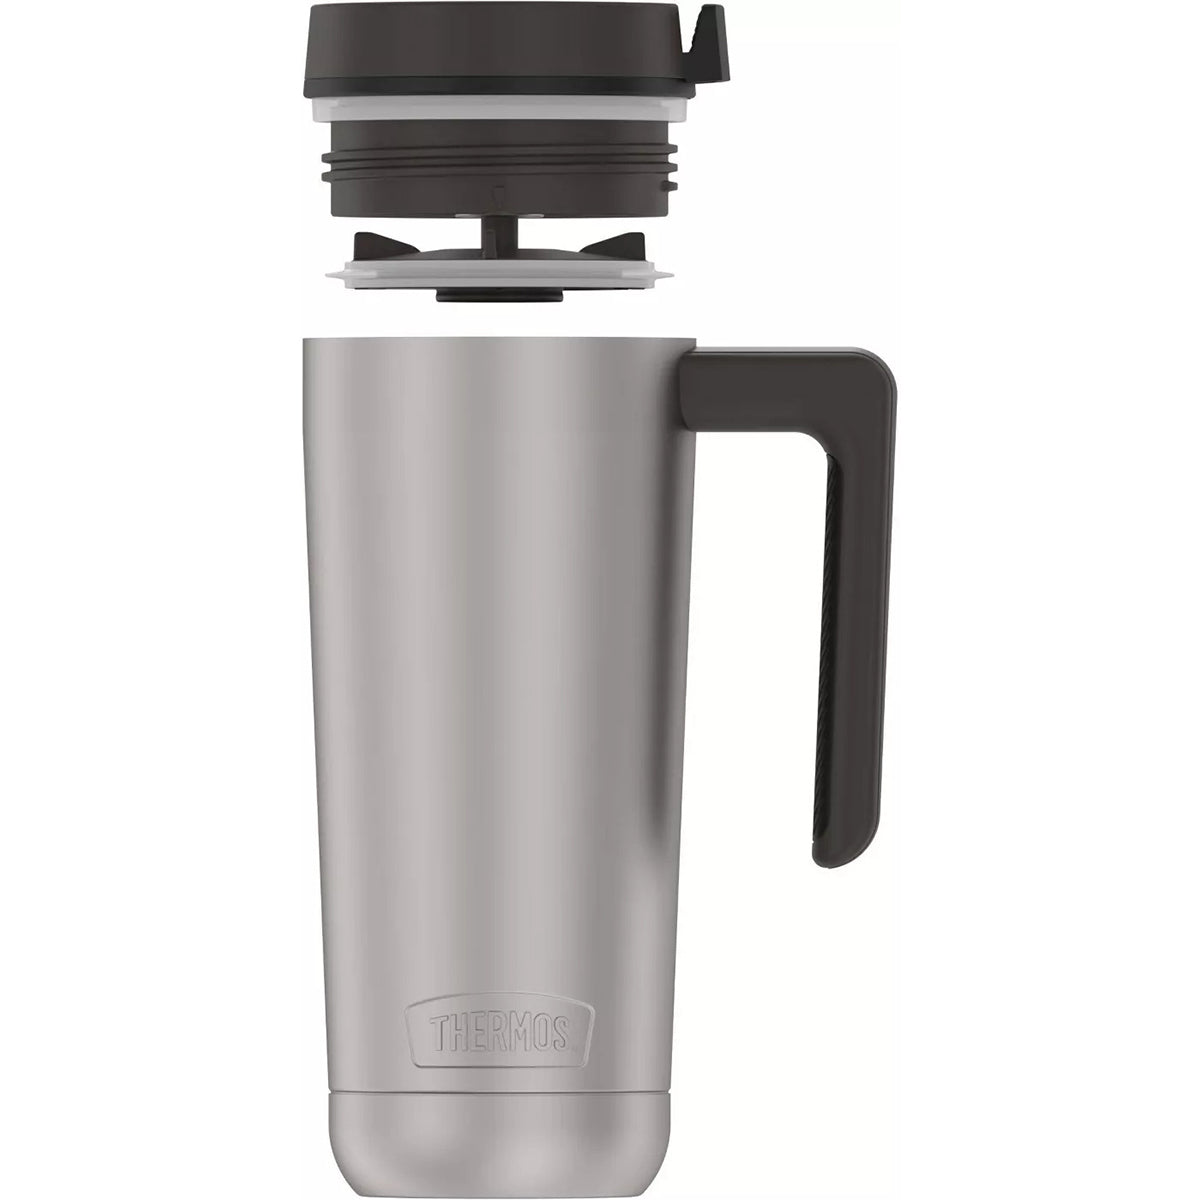 Thermos 18 oz. Vacuum Insulated Stainless Steel Mug - Matte Steel/Espresso Black Thermos